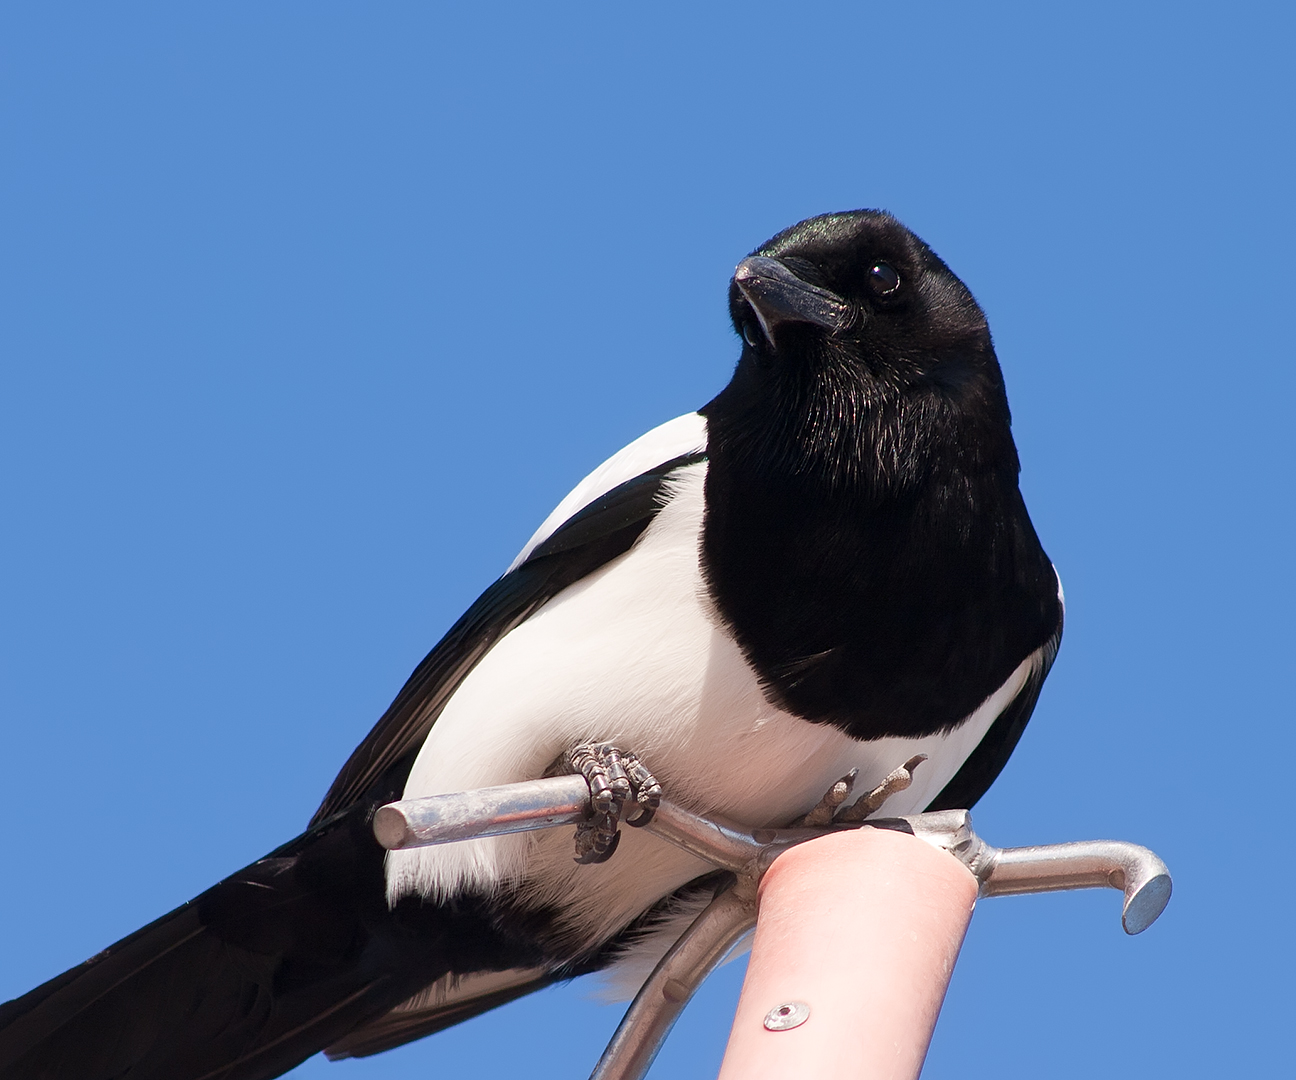 a bird perched on top of a person's hand